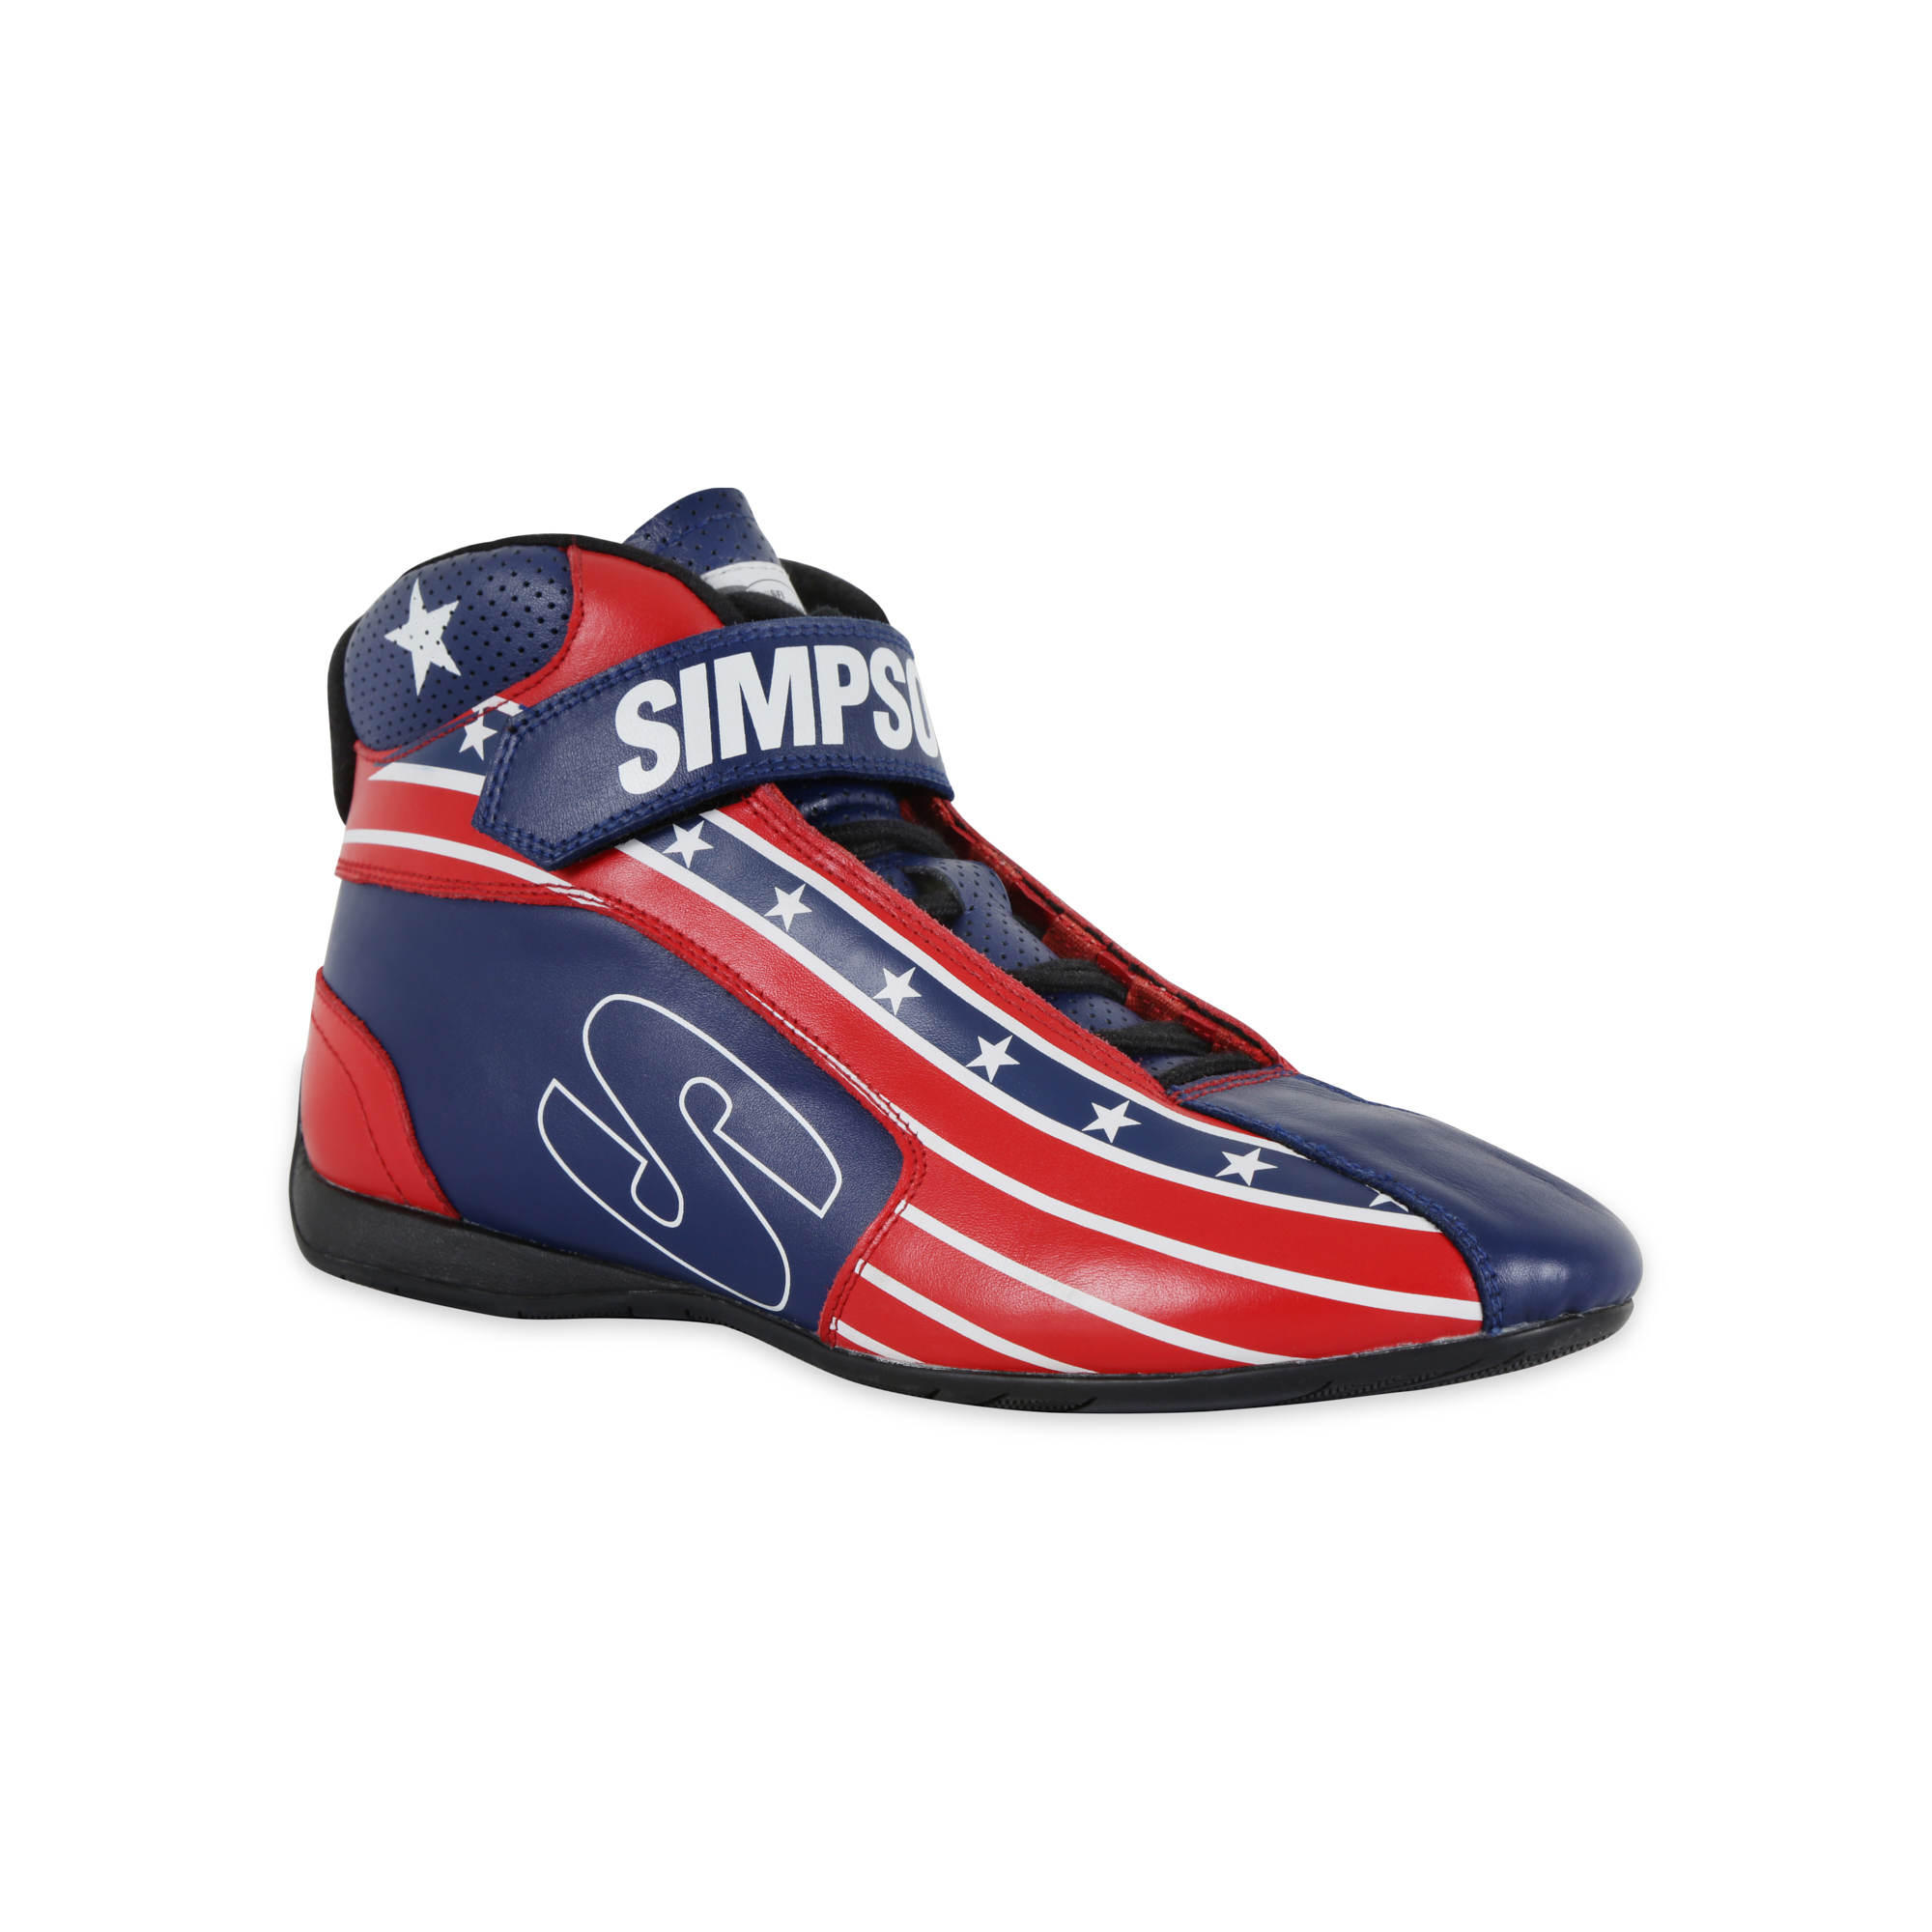 Simpson Safety DX2105P Shoe, DNA X2 Patriot, Mid-Top, SFI 3.3/5, Leather Outer, Nomex Inner, Red / White / Blue, Size 10.5, Pair